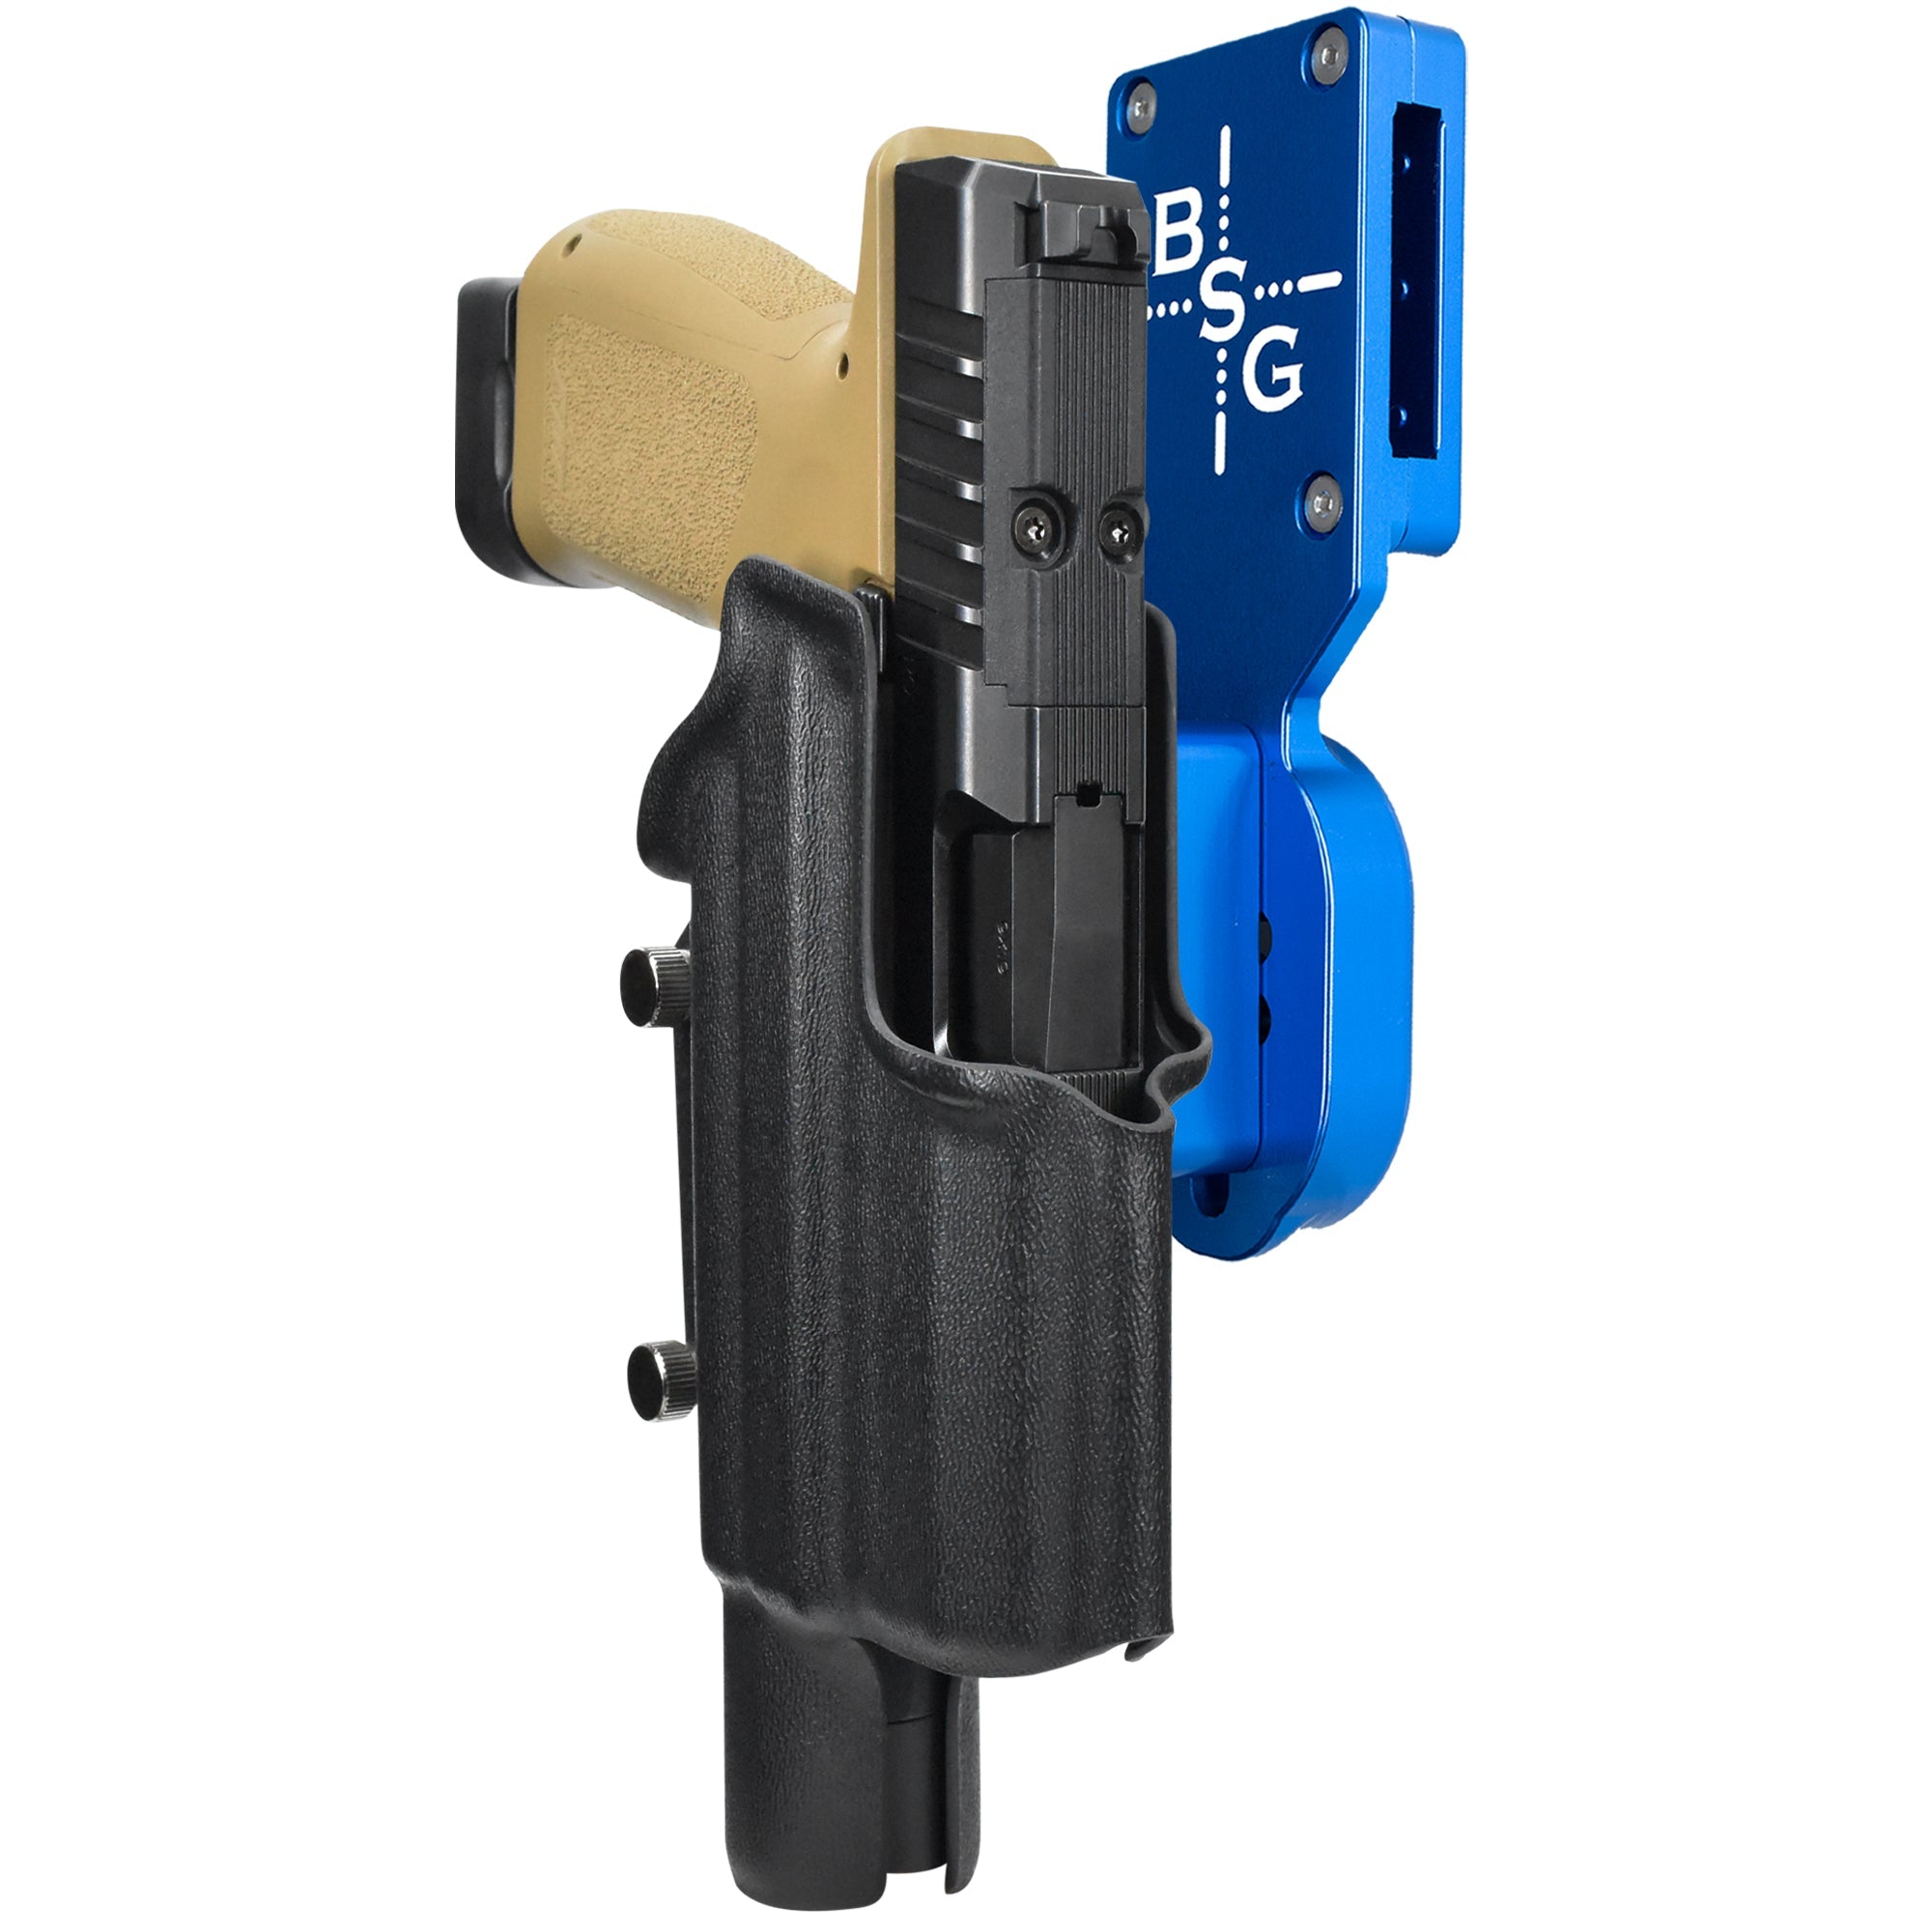 Rost Martin RM1C w/ SureFire X300U-A Pro Heavy Duty Competition Holster in Blue / Black